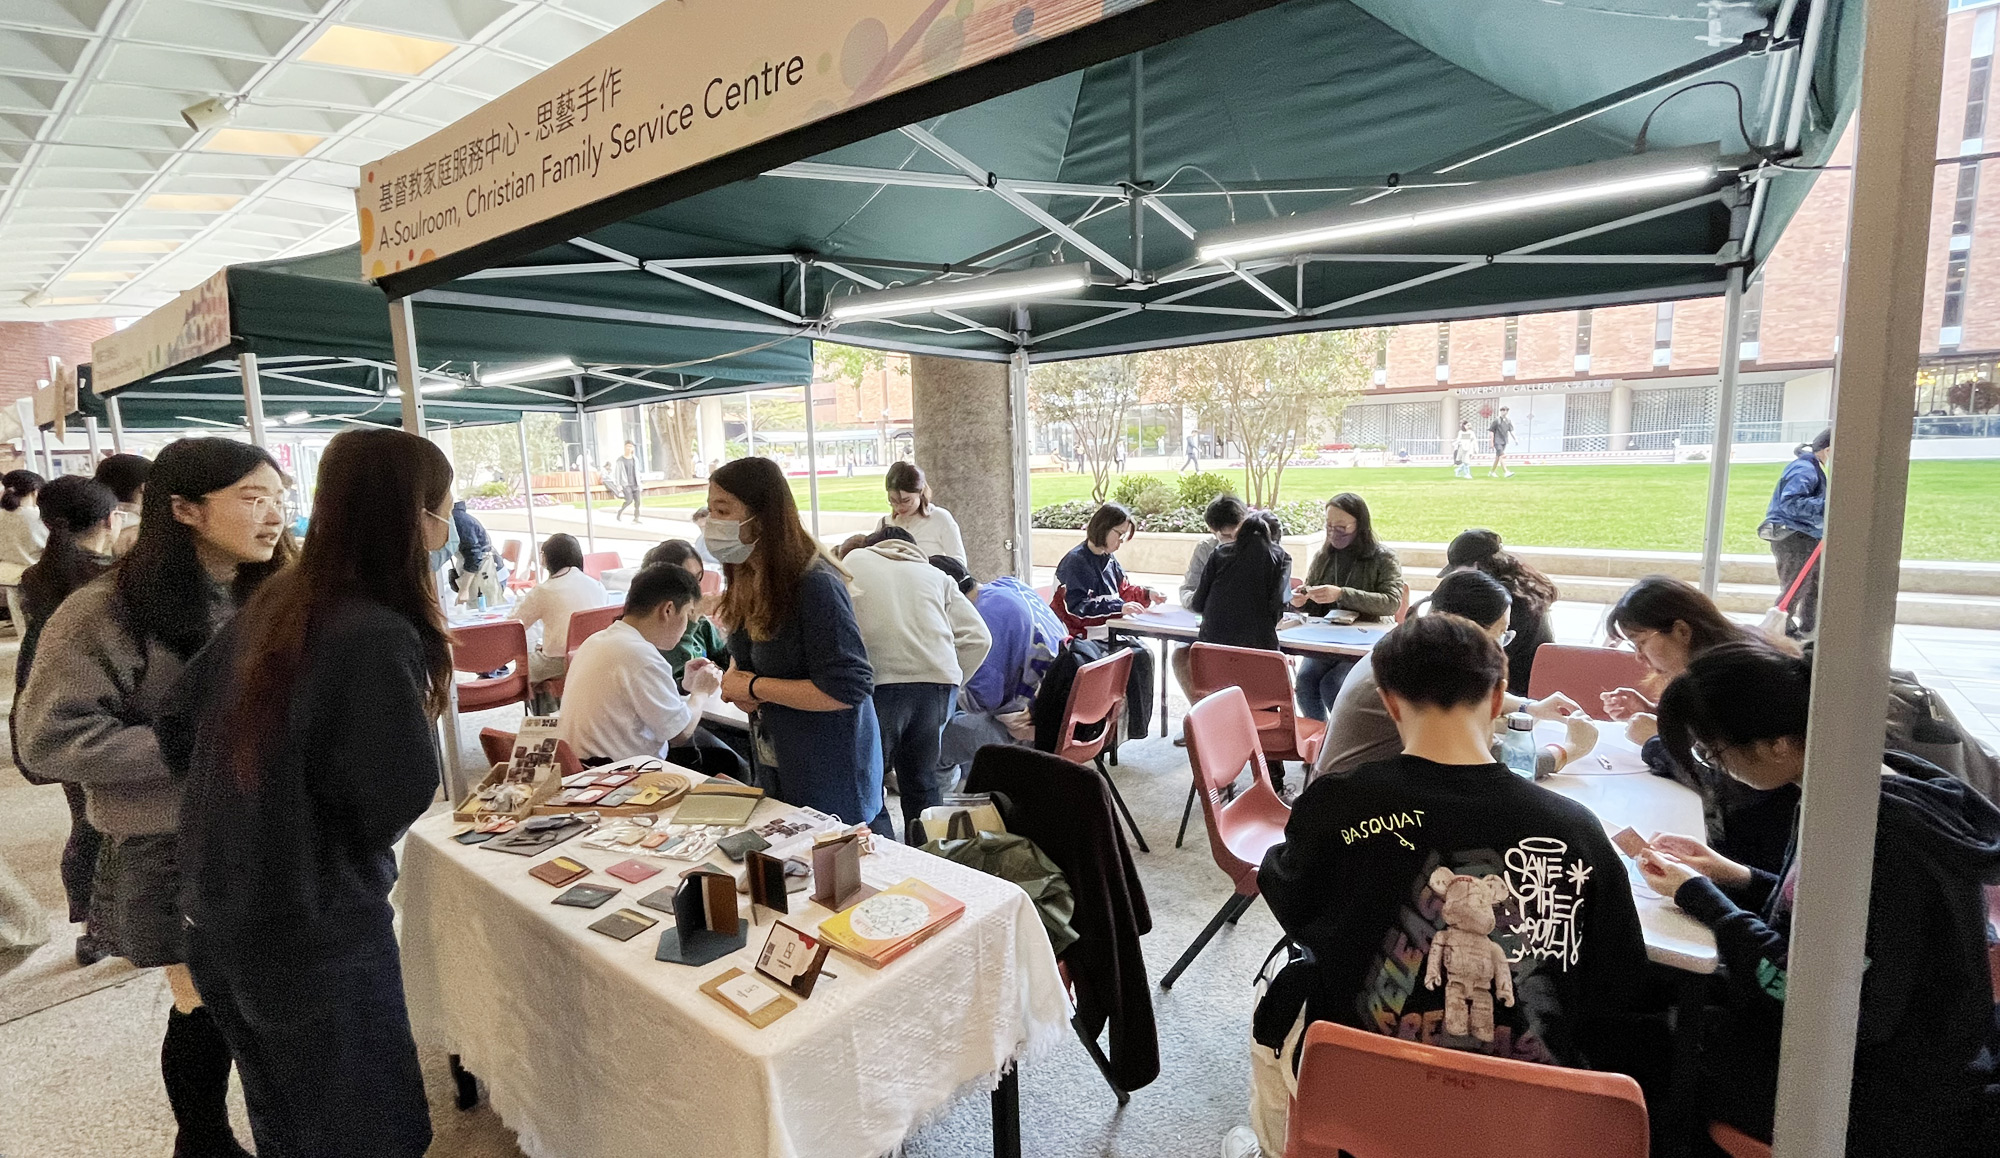 Promoting diversity and inclusion on campus - A-Soulroom conducts workshops at The Hong Kong Polytechnic University and The Chinese University of Hong Kong